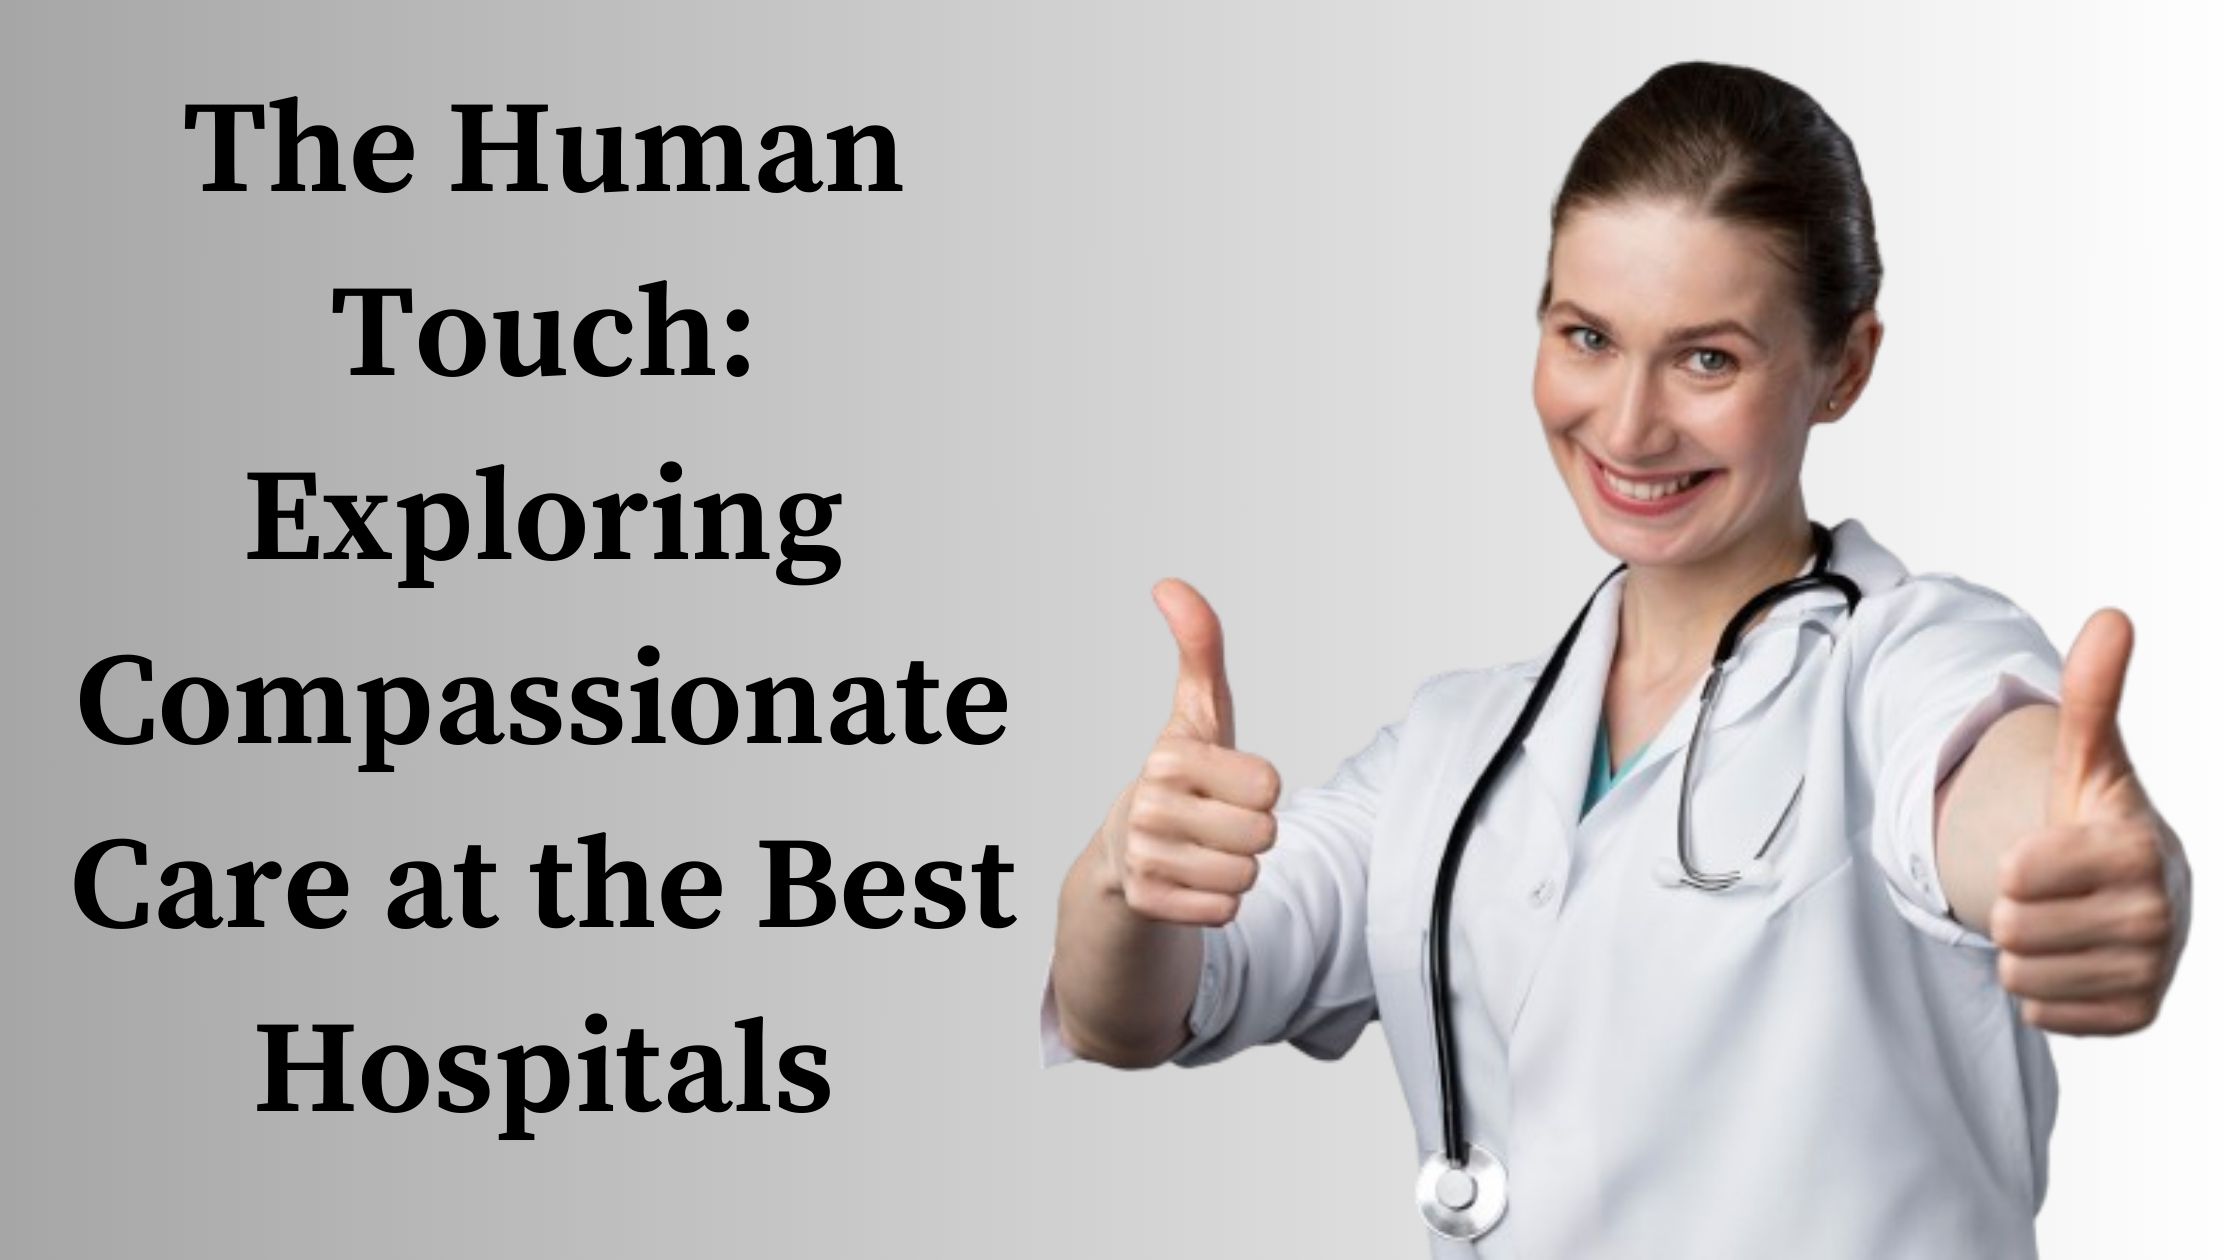 The Human Touch: Exploring Compassionate Care at the Best Hospitals